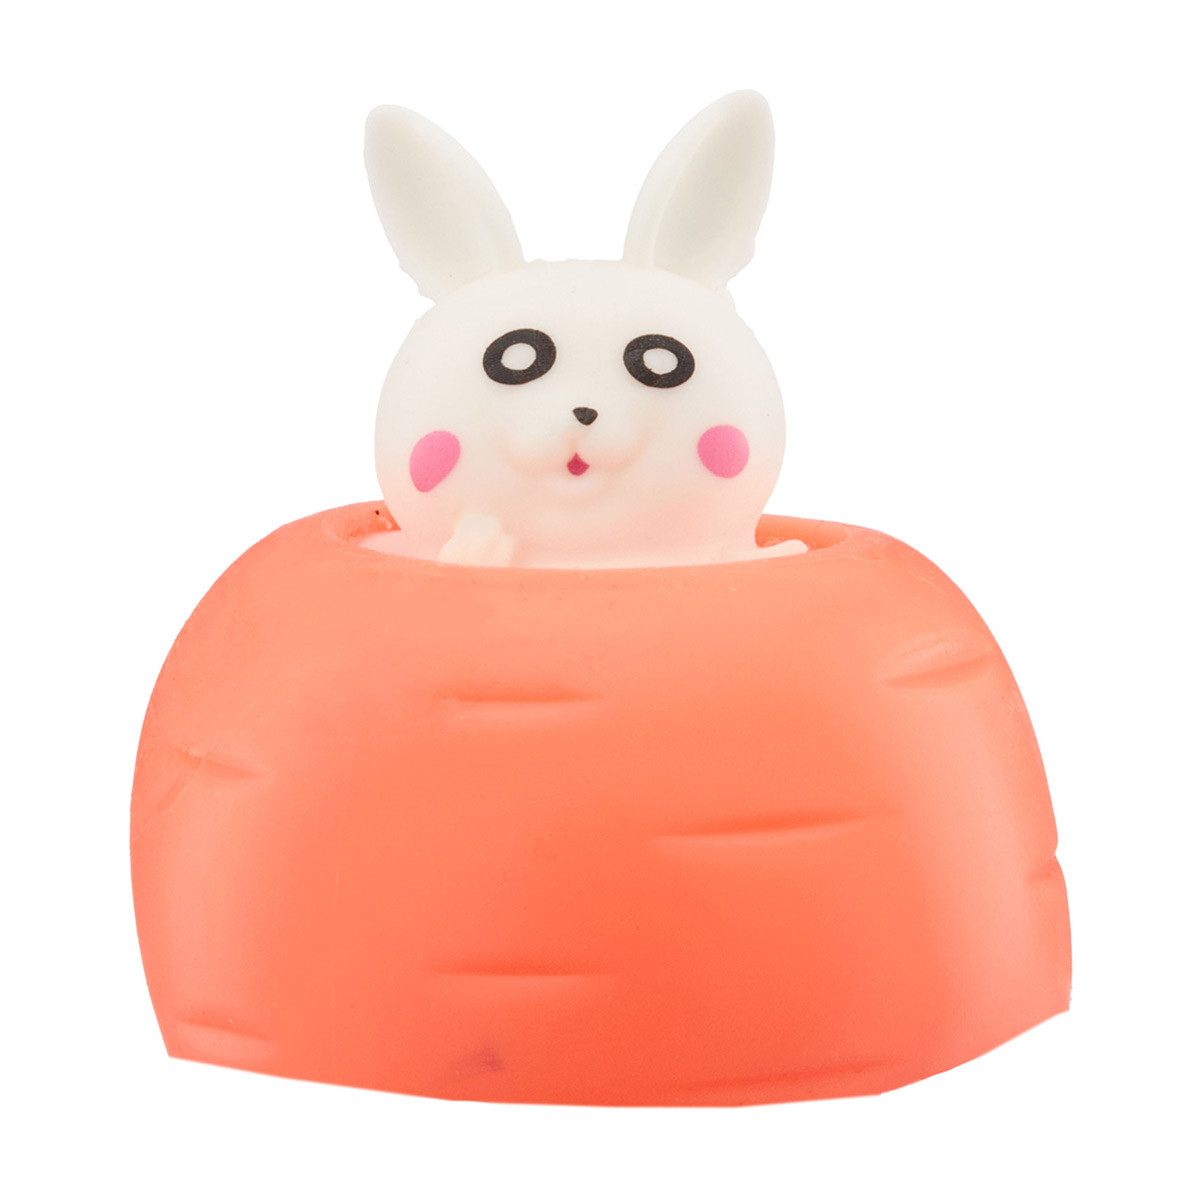 Peek-A-Boo Rabbit Squishy Squeeze Toy